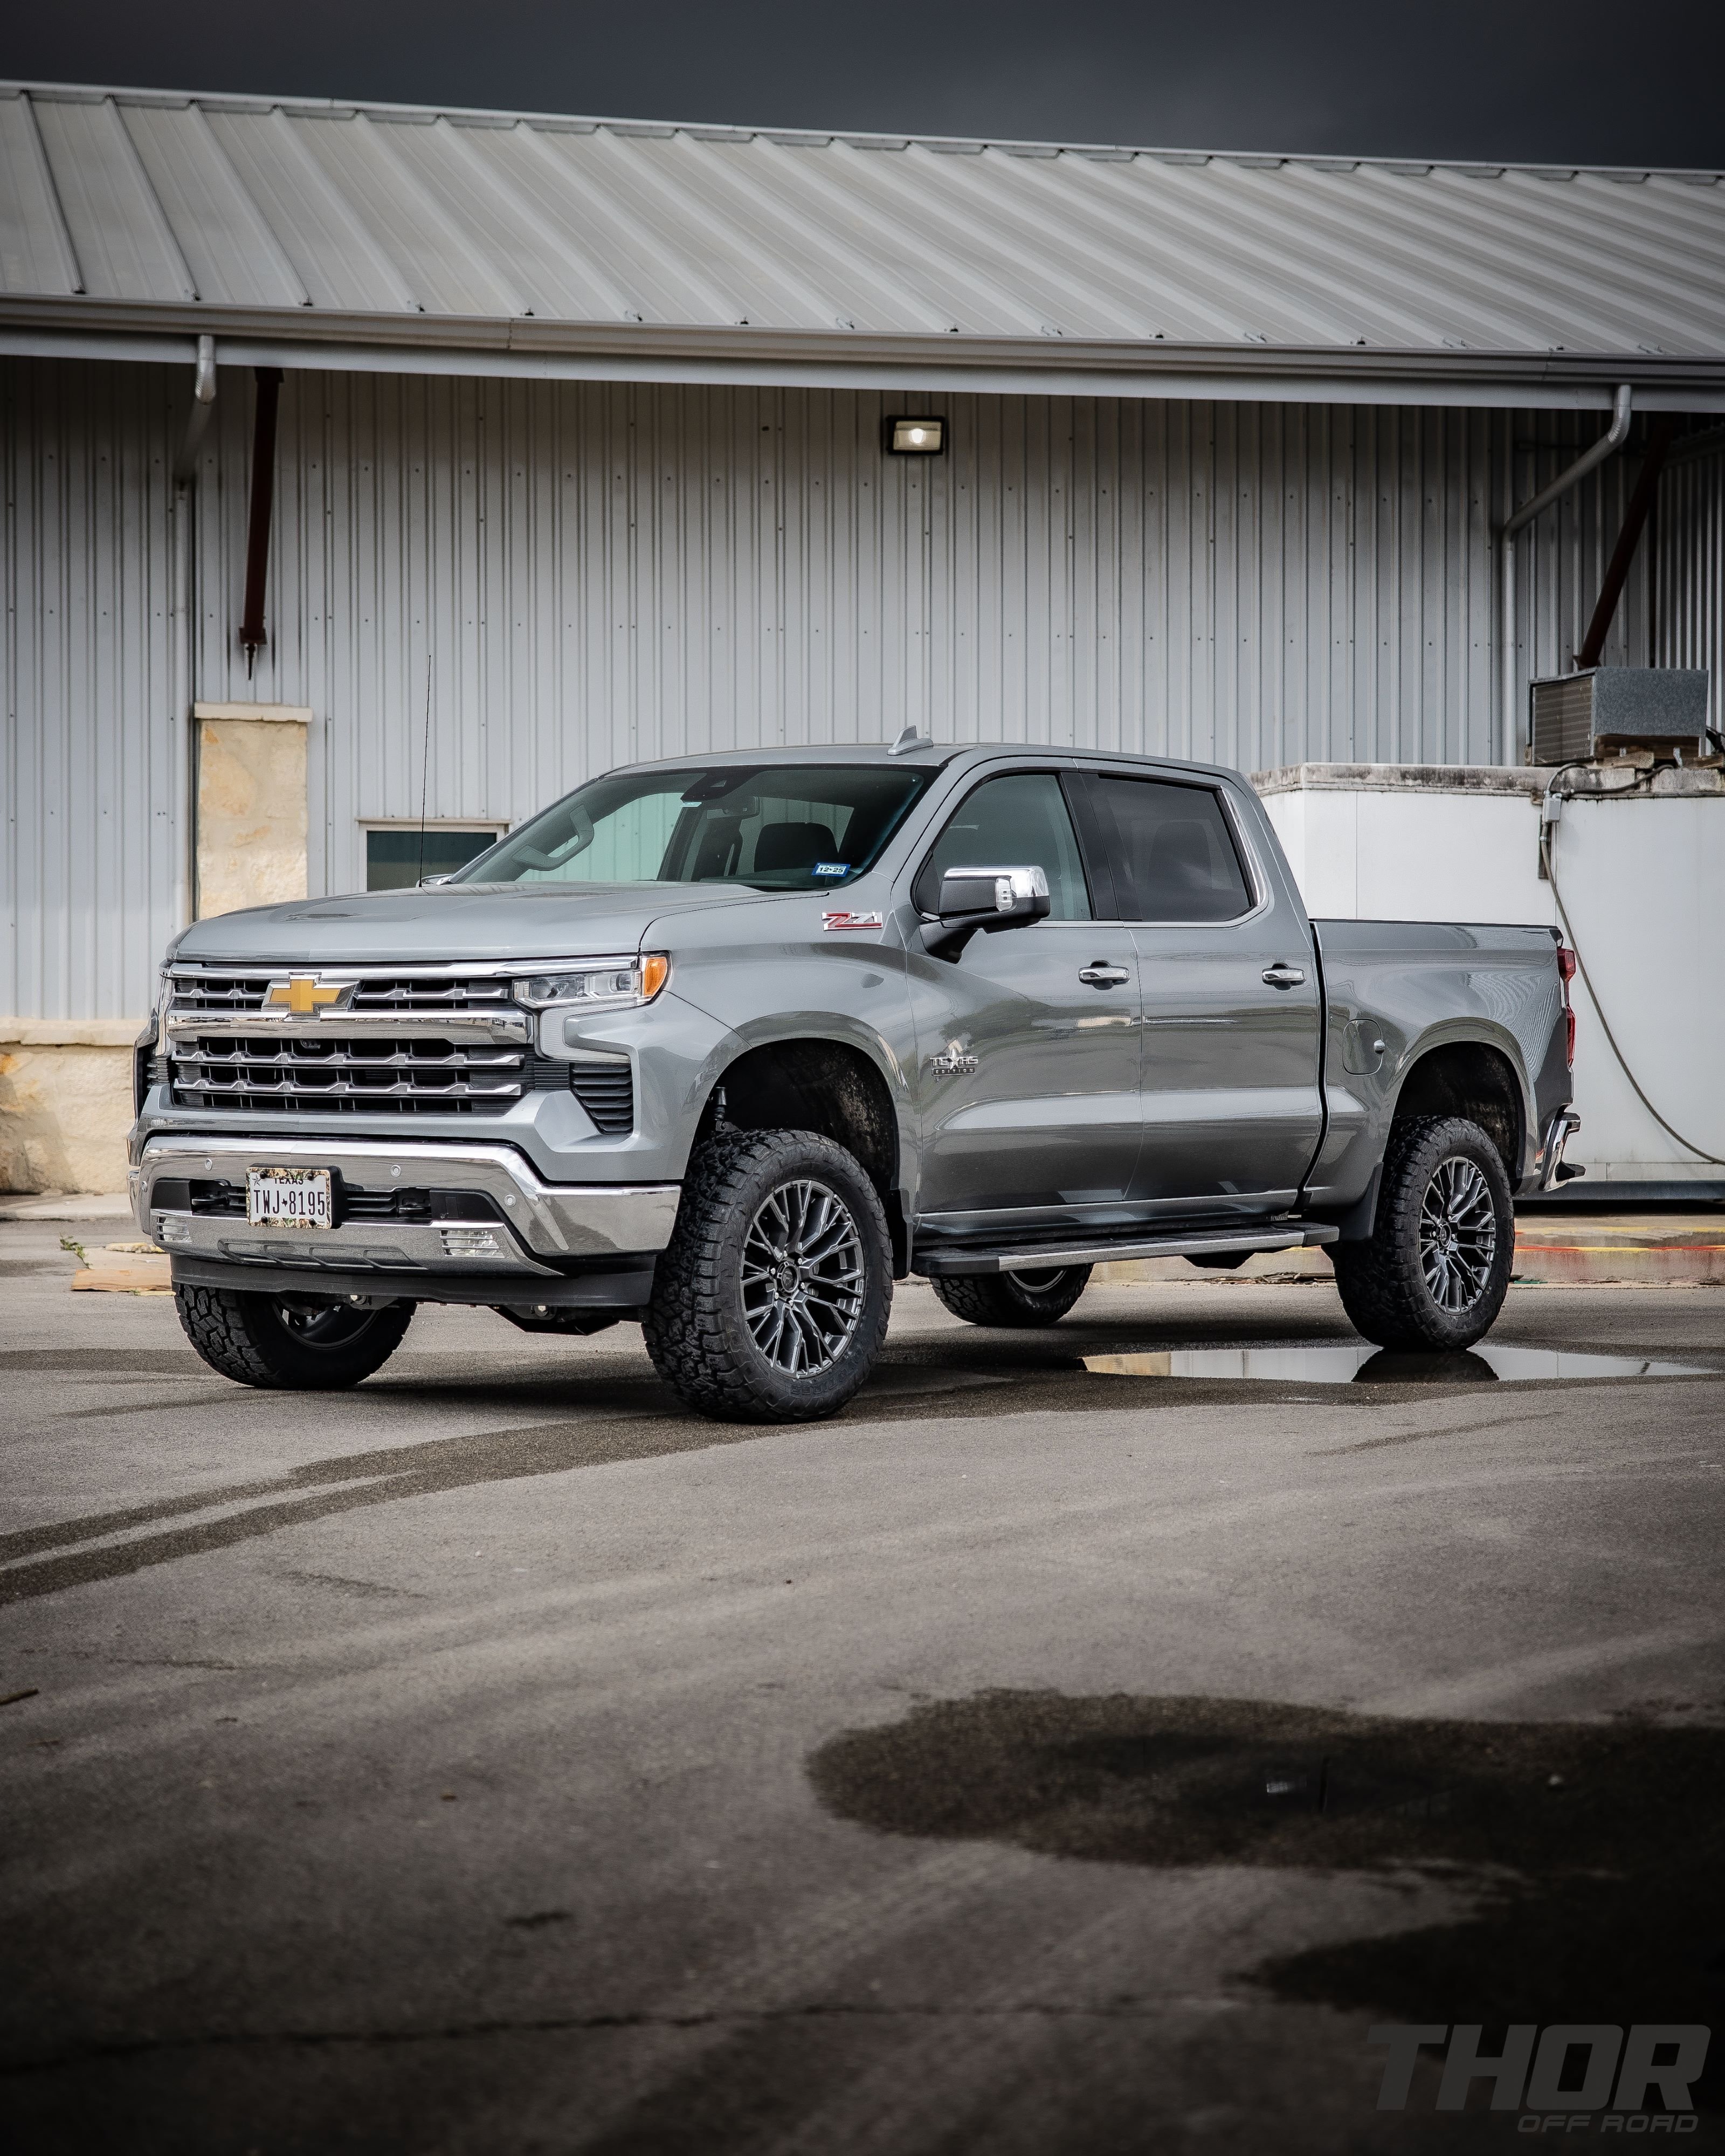 2024 Chevrolet Silverado 1500 LTZ in Silver with BDS 4" Lift Kit, Fuel Off-Road Rebar 6 20x9" Wheels, 33x12.50R20 Toyo Open Country A/T III Tires